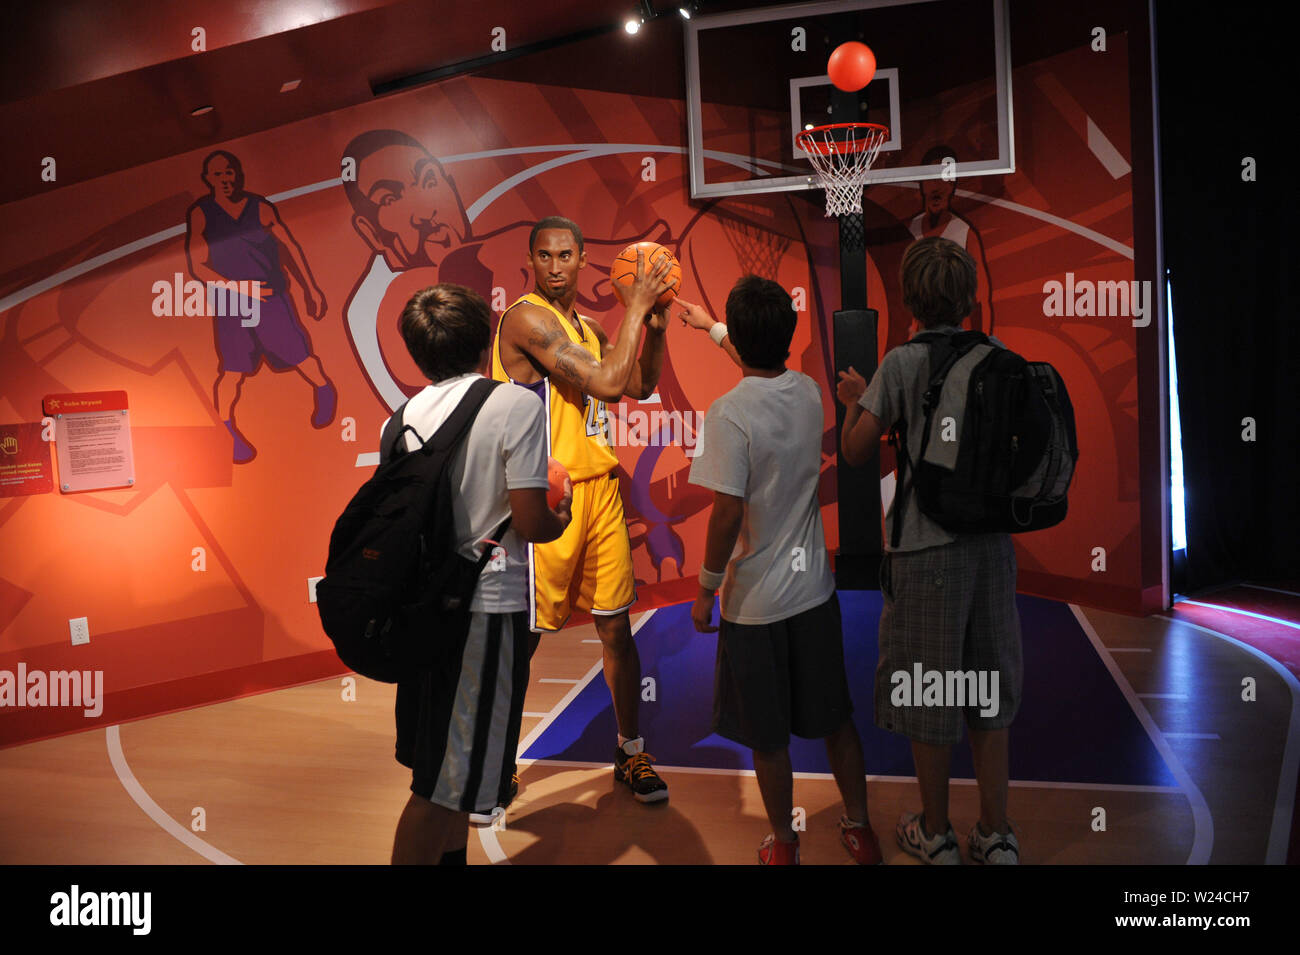 LOS ANGELES, CA. July 21, 2009: Kobe Bryant waxwork figure - grand opening of Madame Tussauds Hollywood. The new $55 million attraction is the first ever Madame Tussauds in the world to be built from the ground up. It is located on Hollywood Boulevard immediately next to the world-famous Grauman's Chinese Theatre. © 2009 Paul Smith / Featureflash Stock Photo